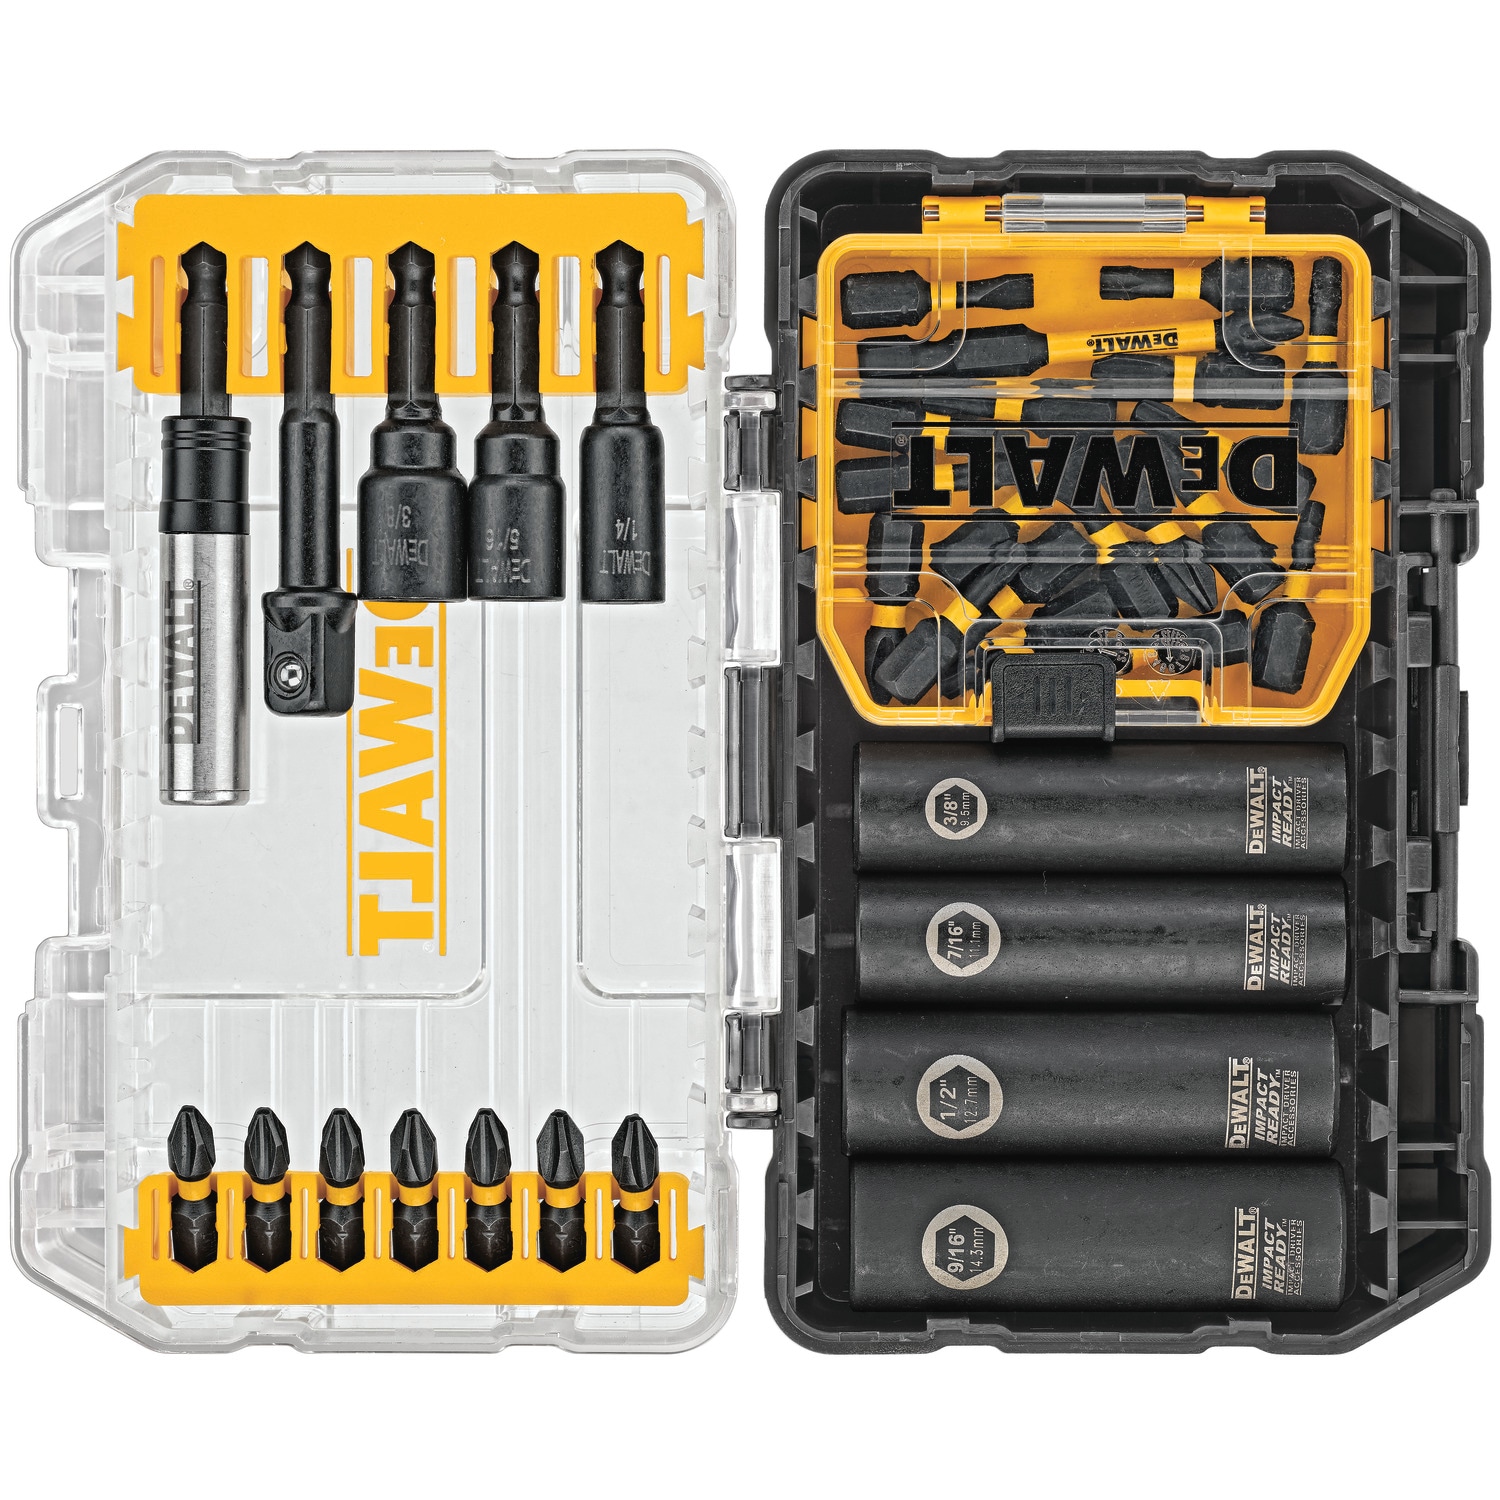 Set Bit (35-Piece) in the Impact Driver Bits department at Lowes.com